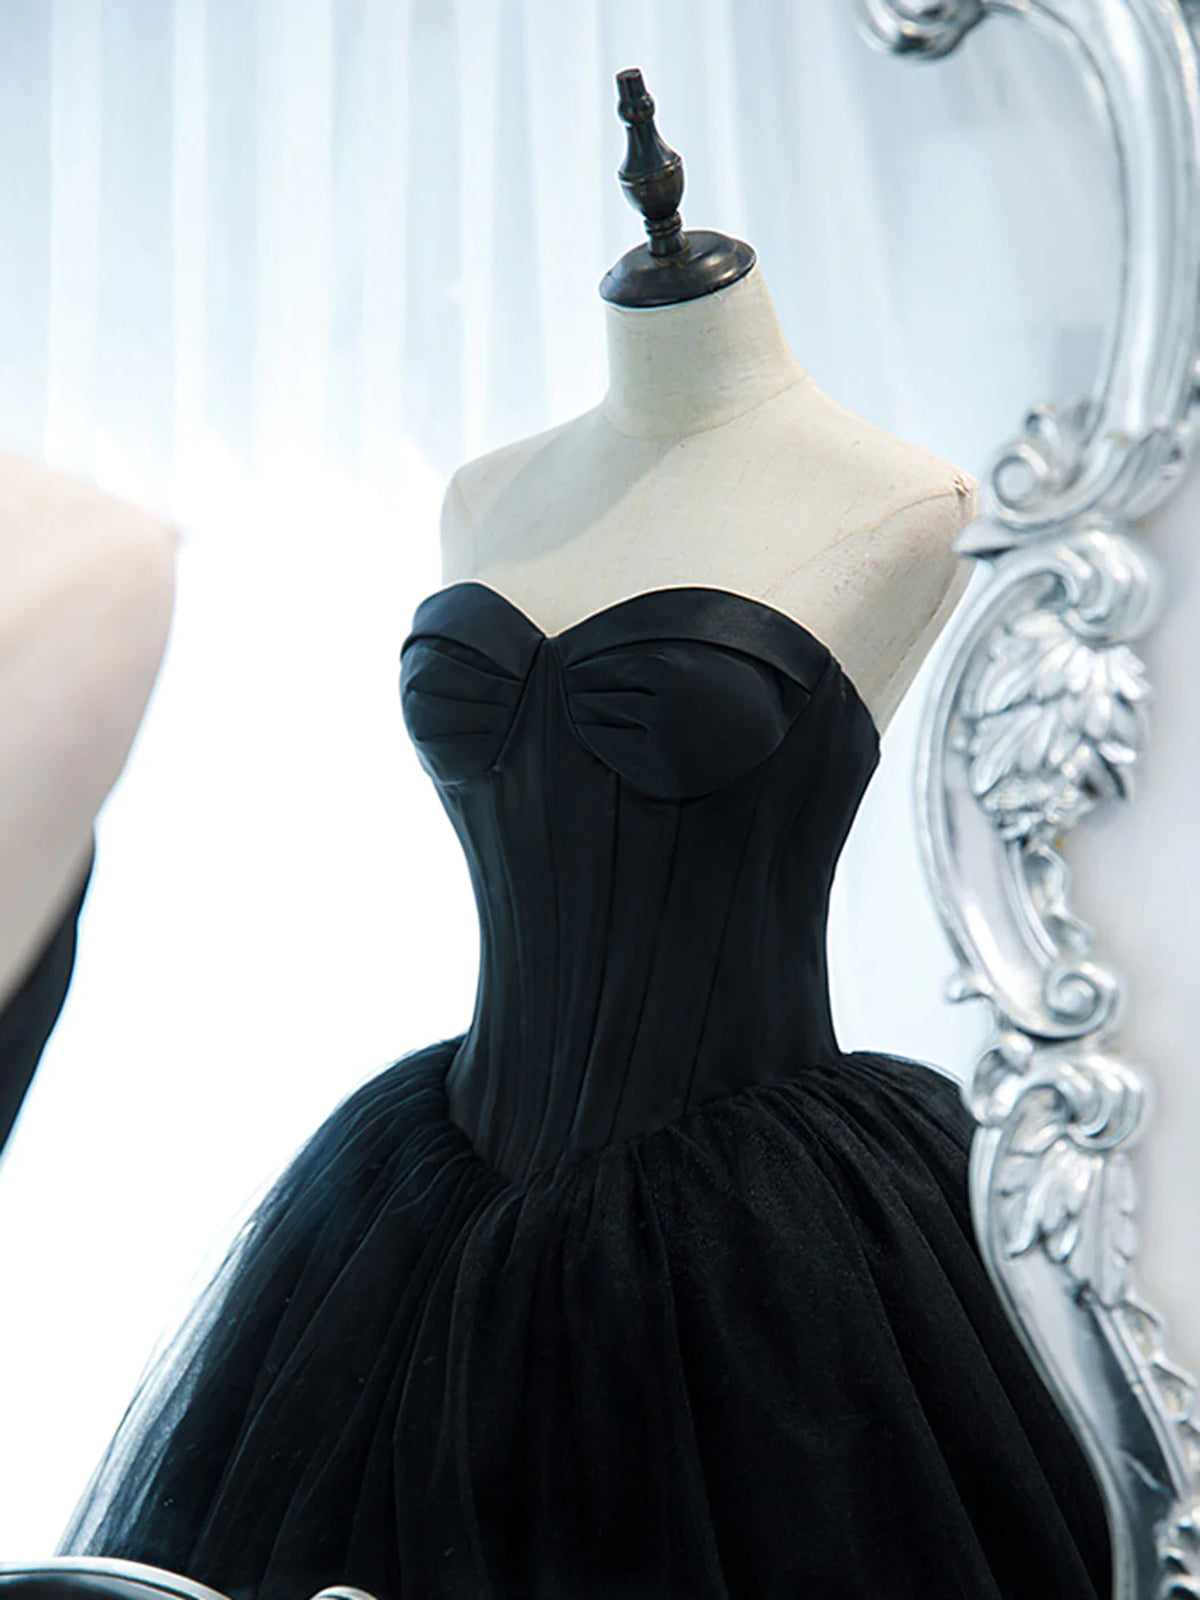 Bridesmaid Dress Mdae To Order, Strapless Sweetheart Neck Black Tulle Prom Dresses, Black Tulle Formal Gowns